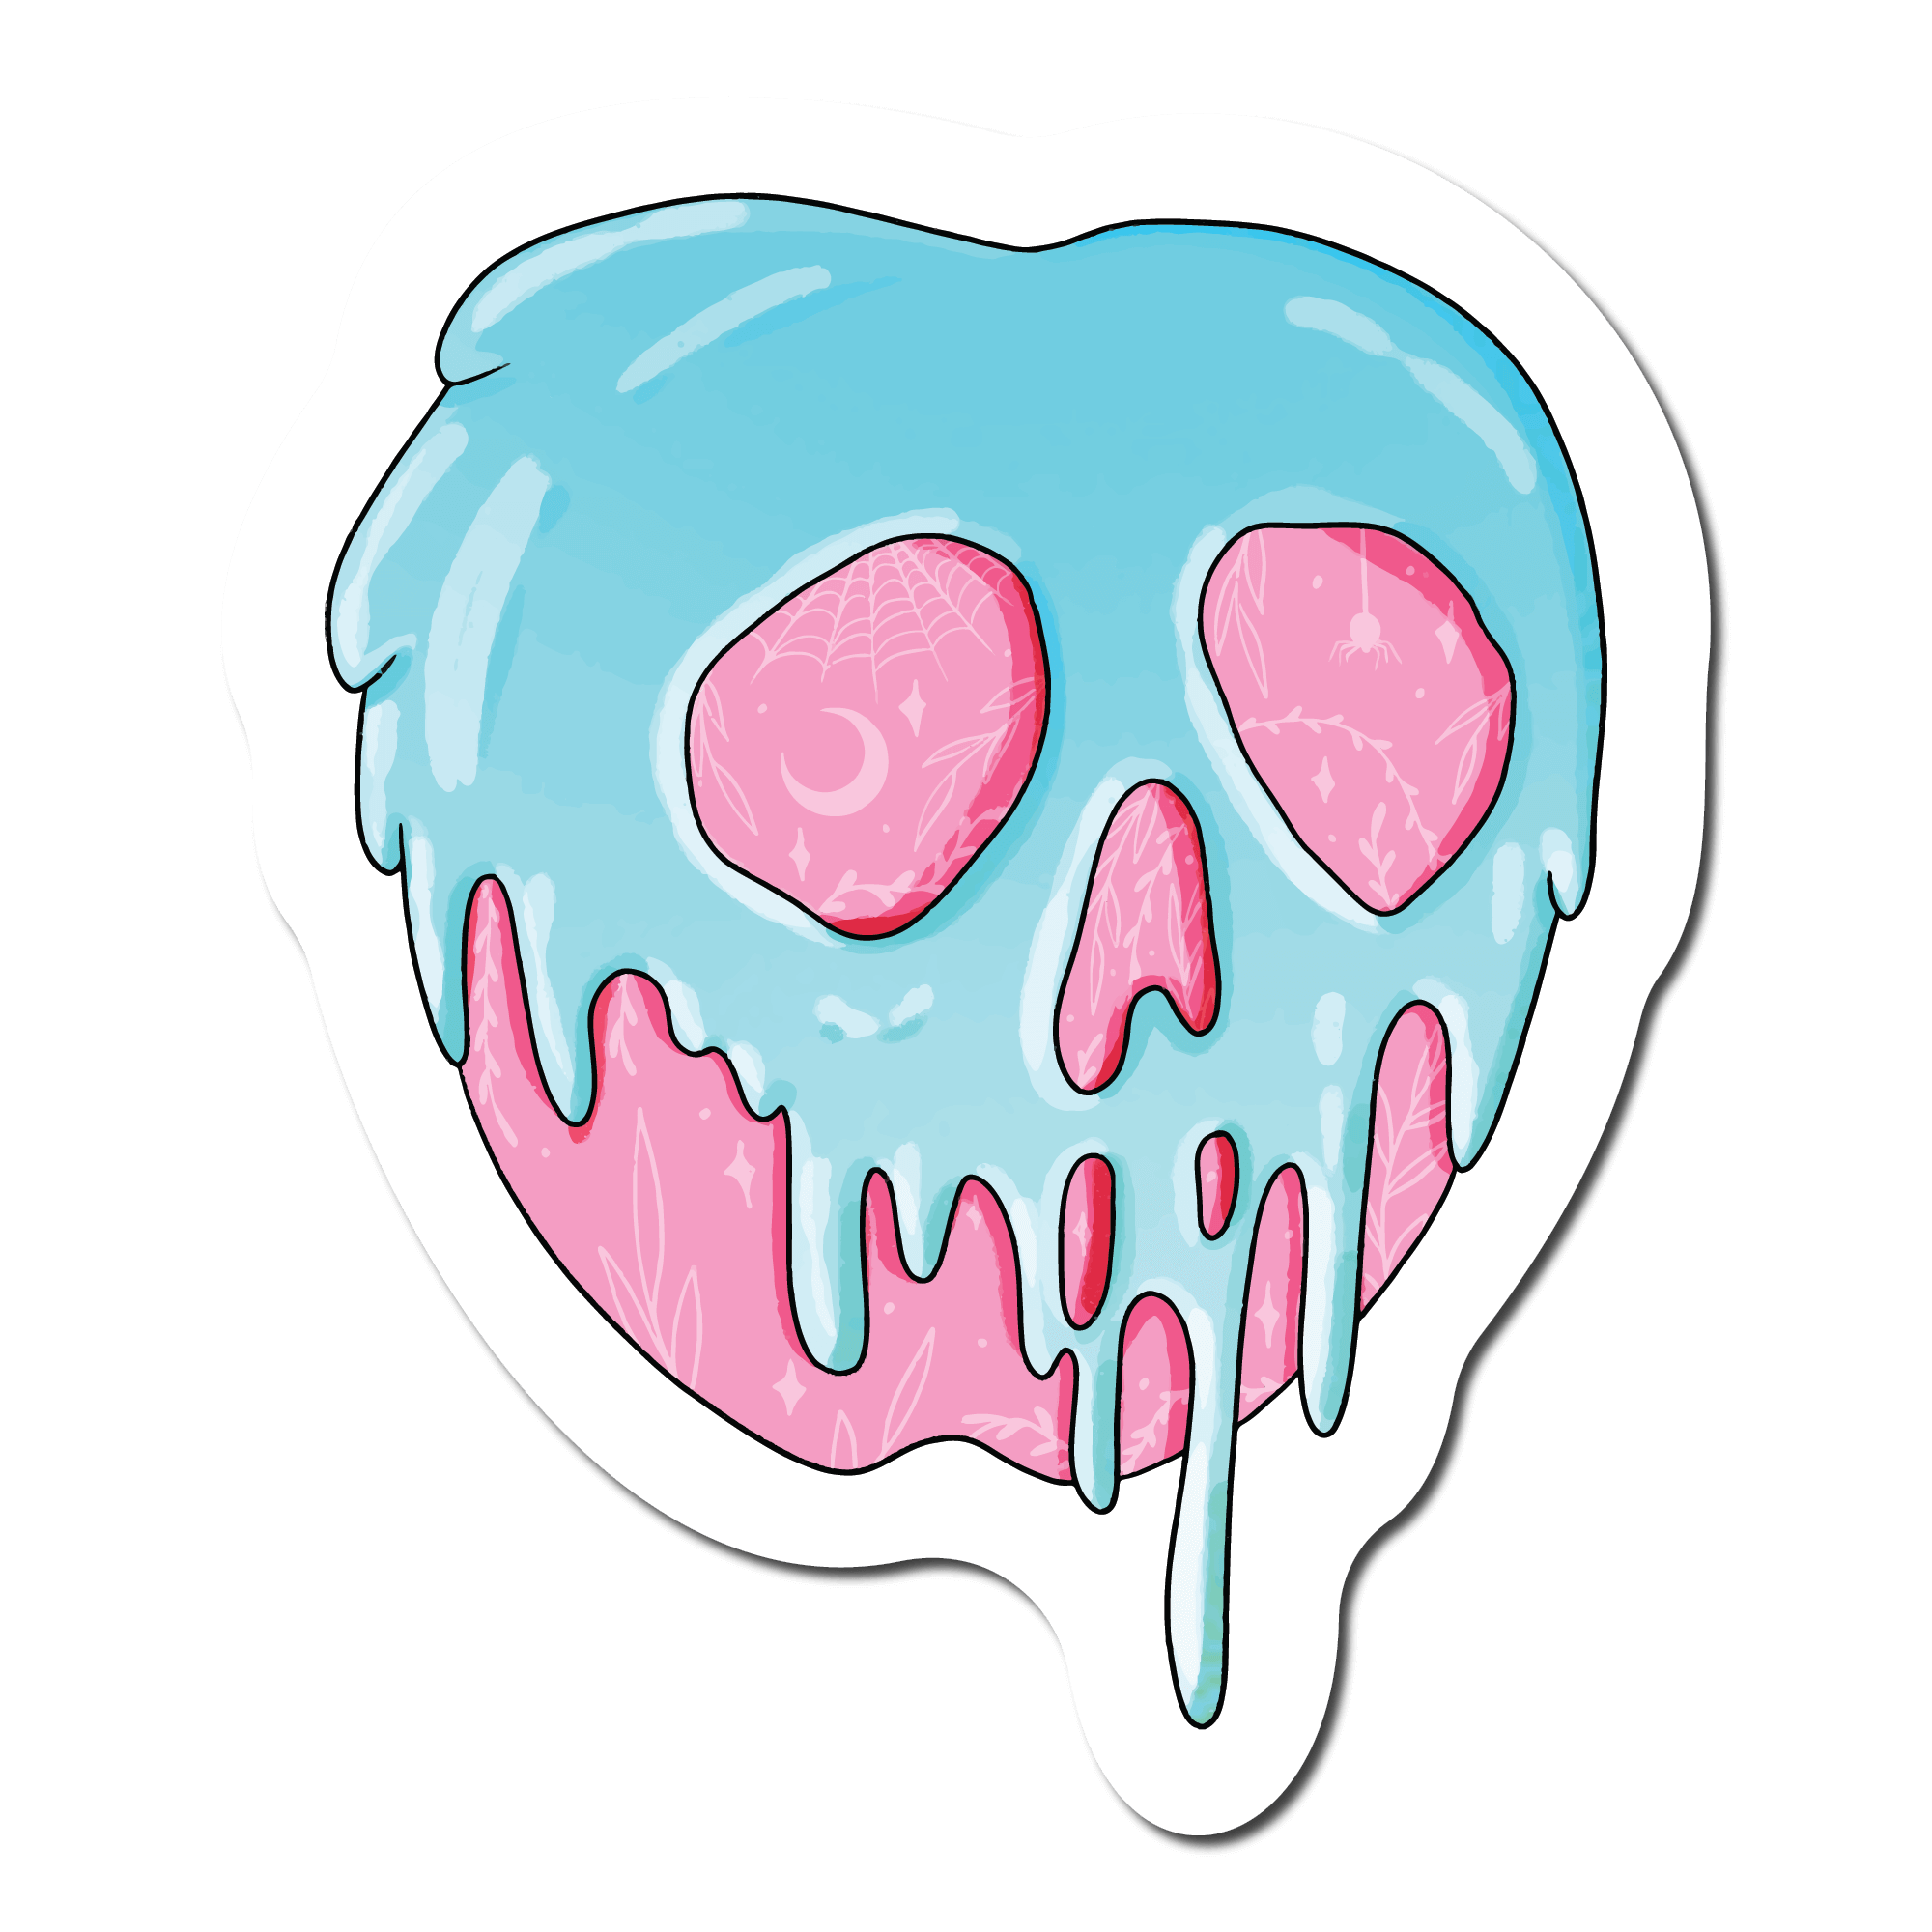 Small Waterproof Sticker of a Pink Apple with Blue goo dripping over it for a phone case or water bottle